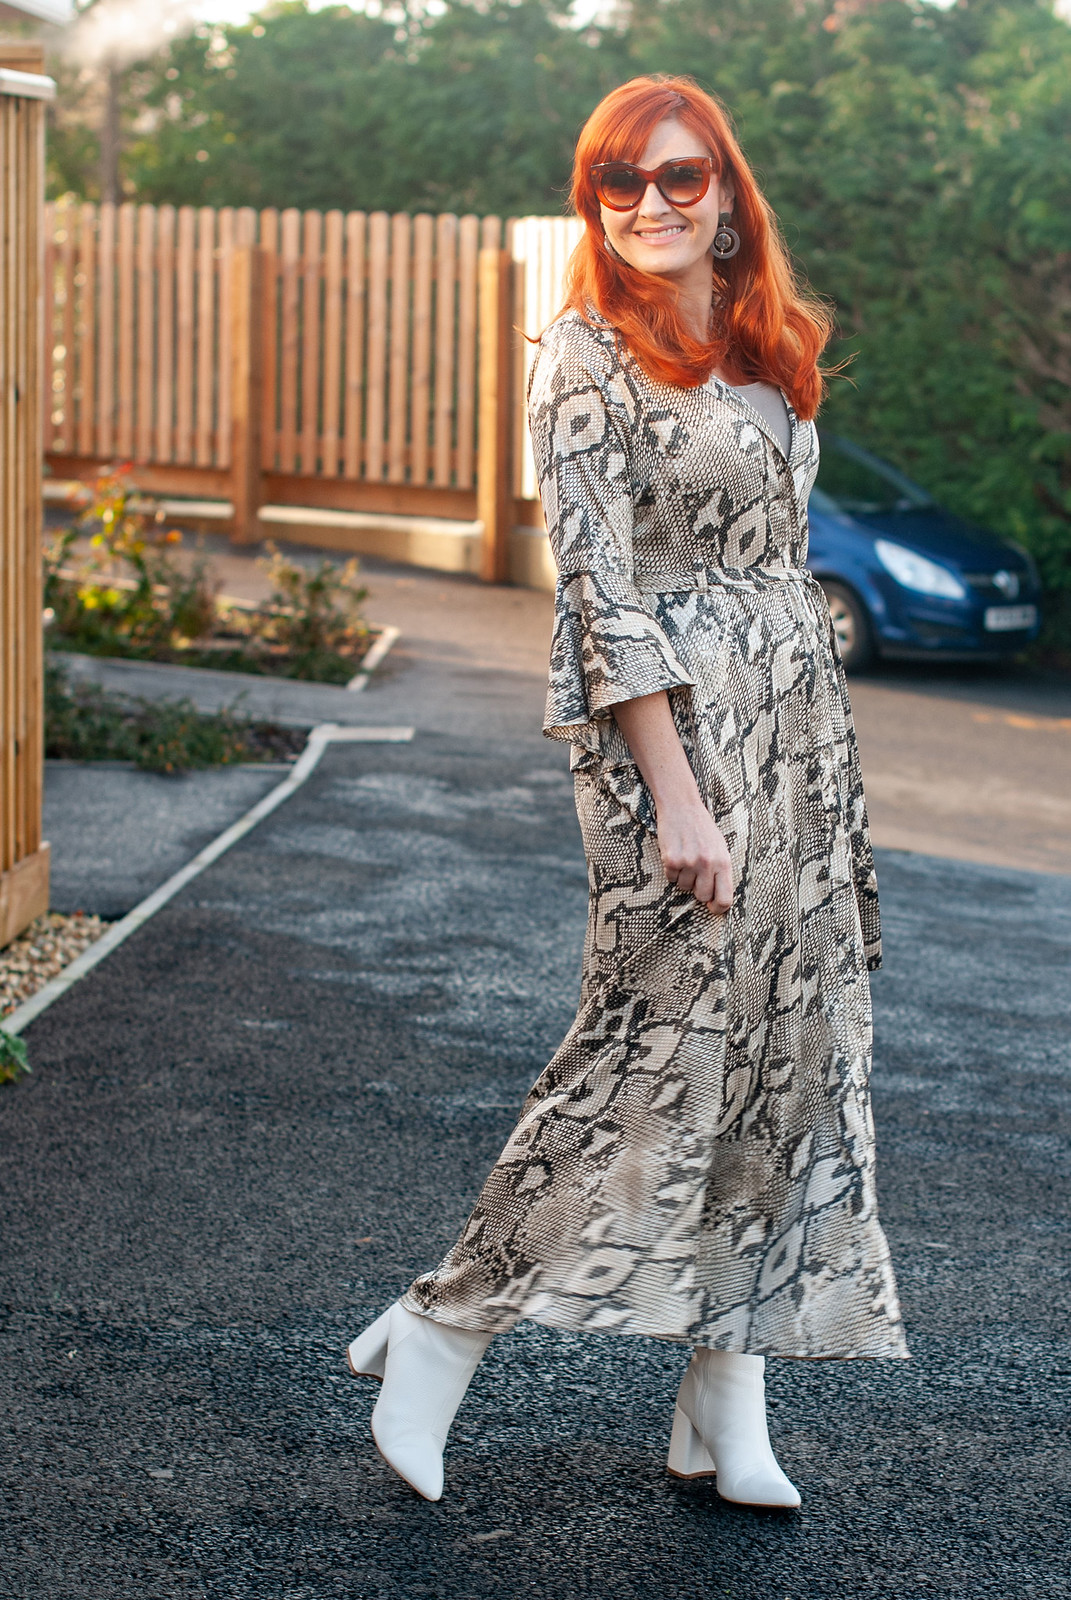 What to Wear for Christmas: A Snakeskin Maxi Dress With White Boots | Not Dressed As Lamb, over 40 style blog